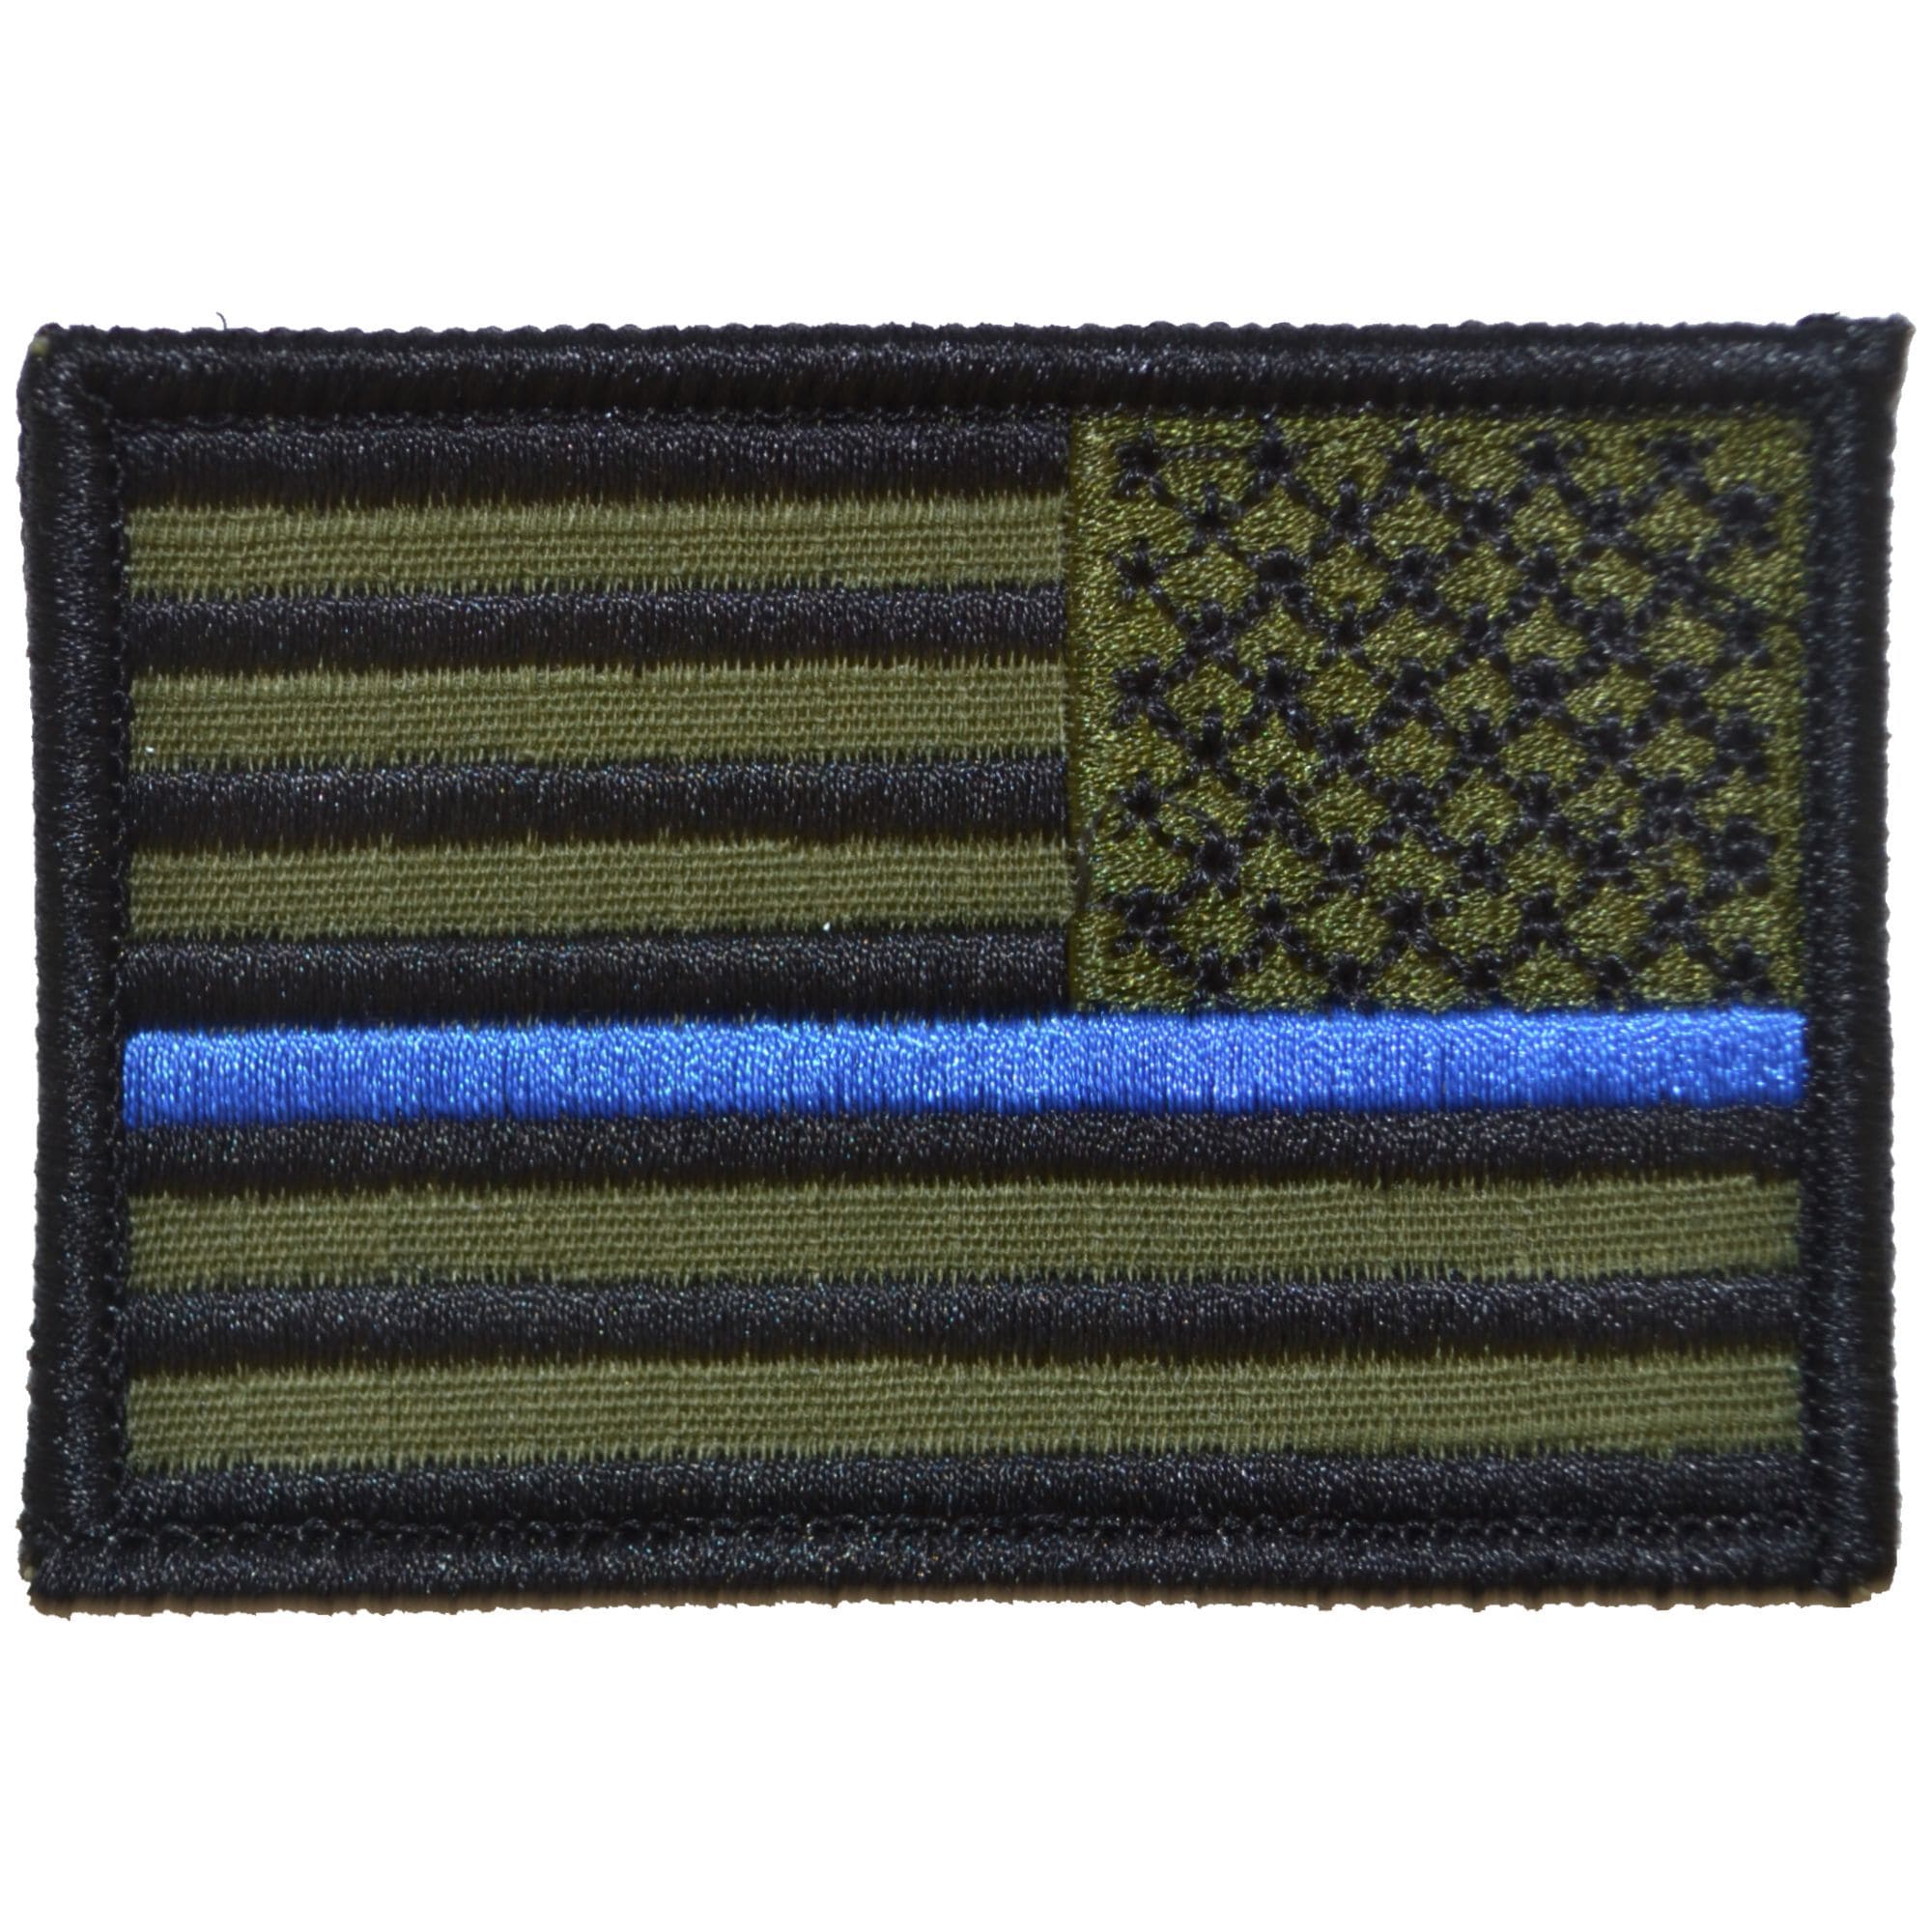 Tactical Gear Junkie Patches Olive Drab Reverse Thin Blue Line Police USA Flag - 2x3 Patch